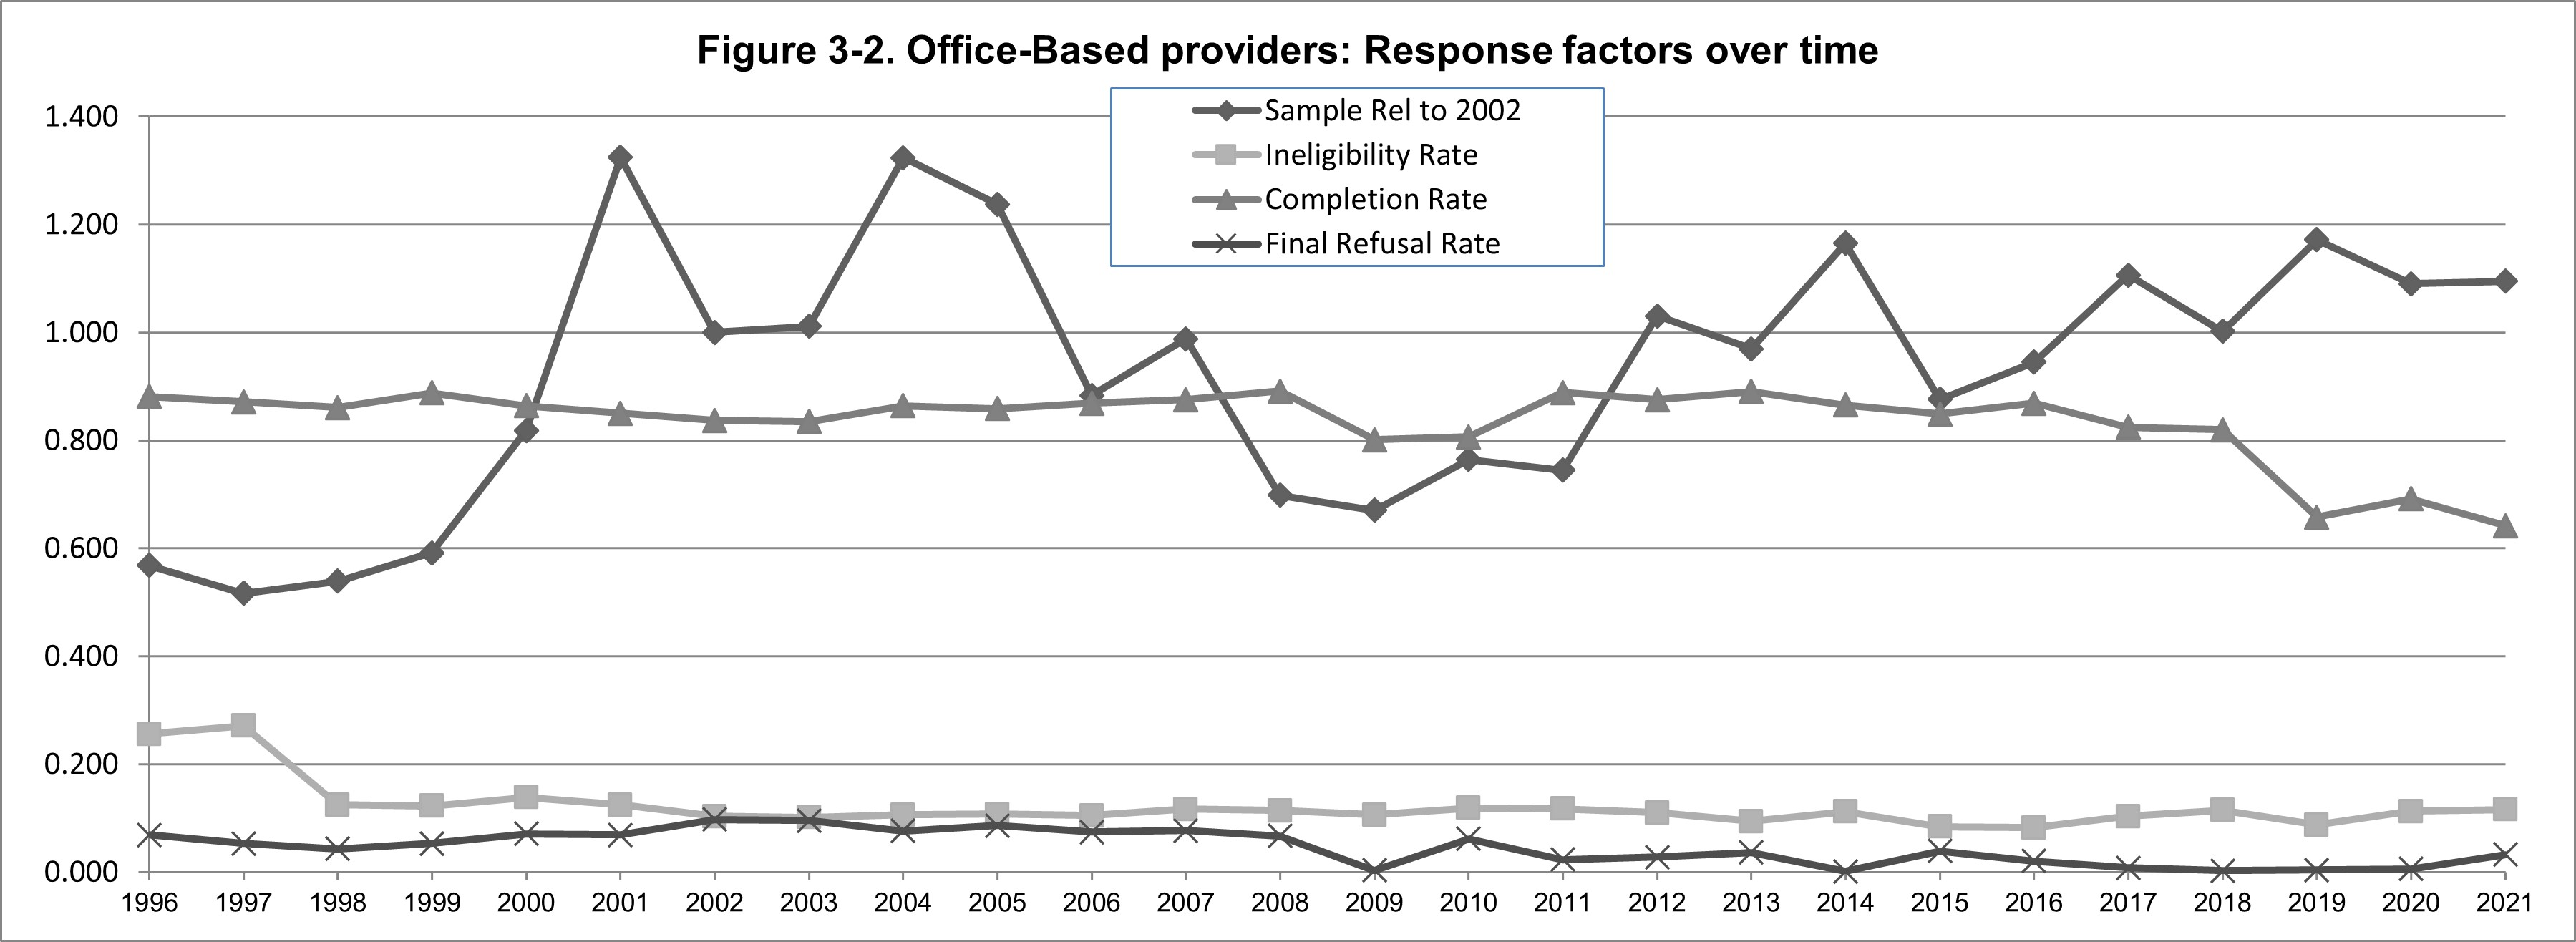 Image displaying response factors over time, from 1996 through 2021 for office based providers